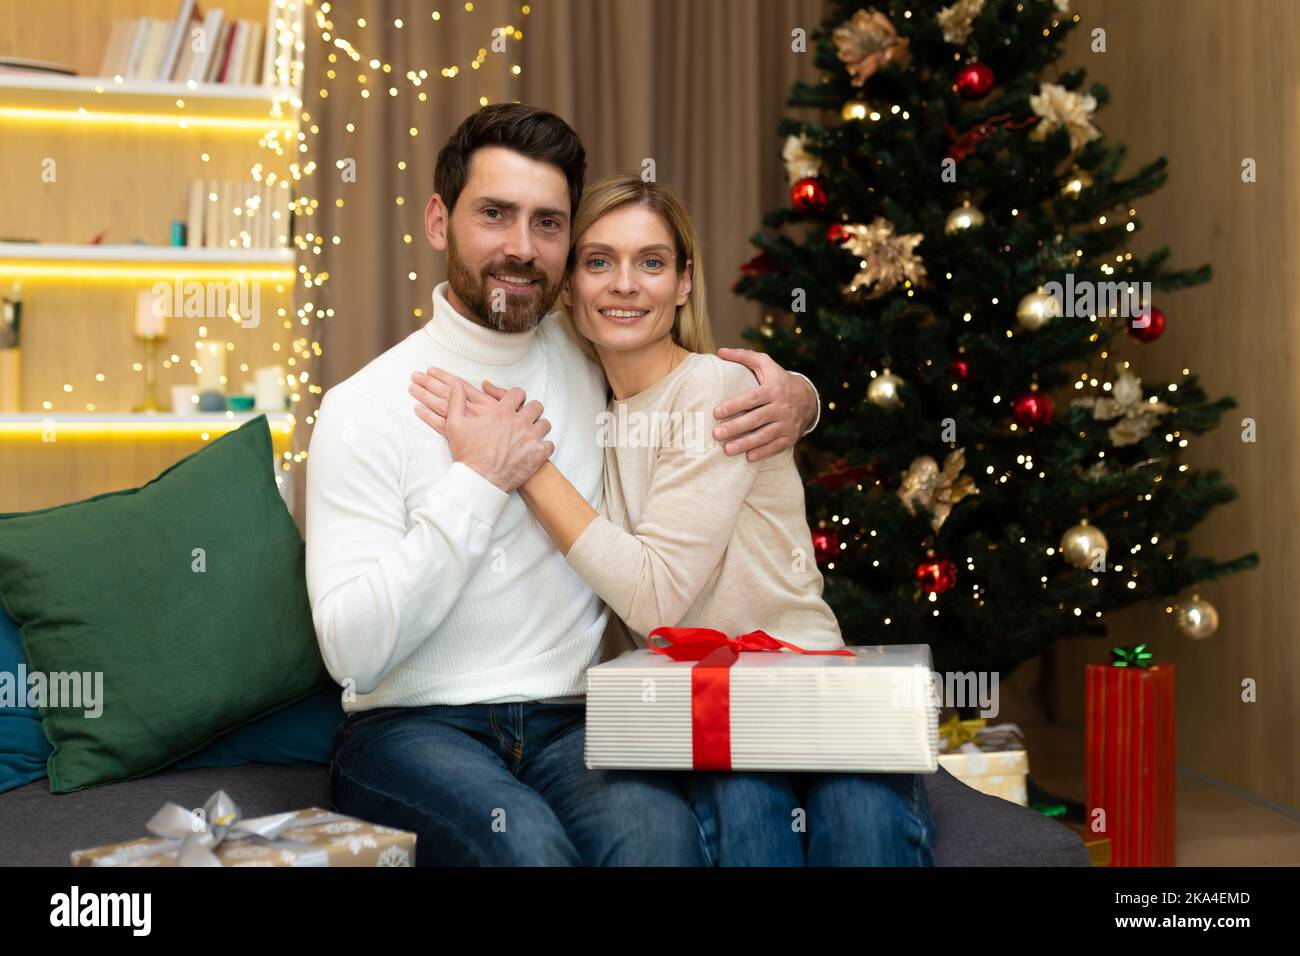 Portrait of happy married couple on Christmas, husband and wife sitting with New Year's gifts at home on sofa and looking at camera, smiling near Christmas tree. Stock Photo